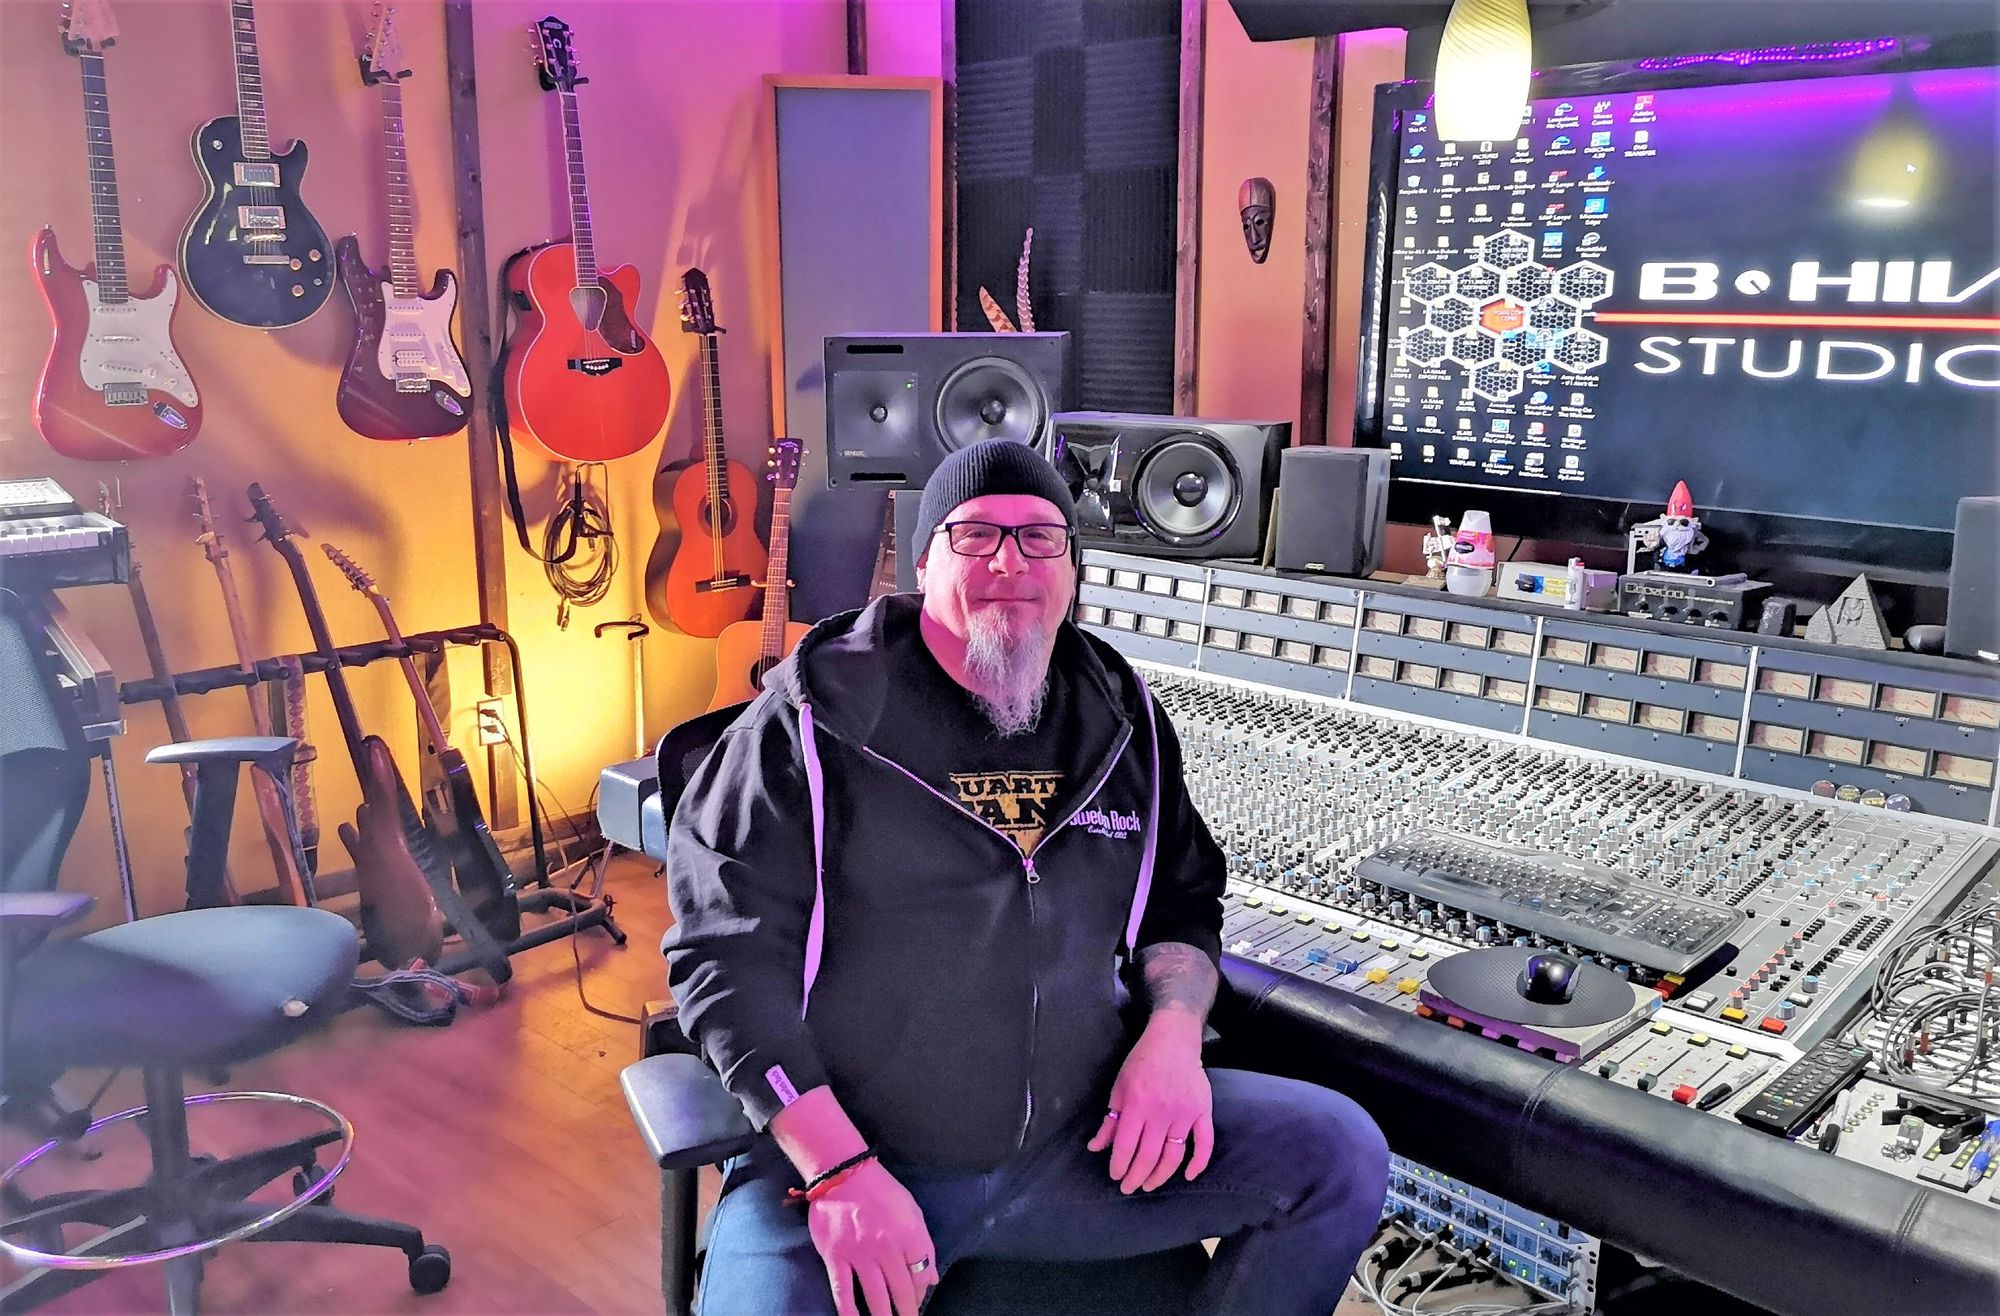 Vankleek Hill’s B-Hive Studios uses technology to work with music artists from around the world